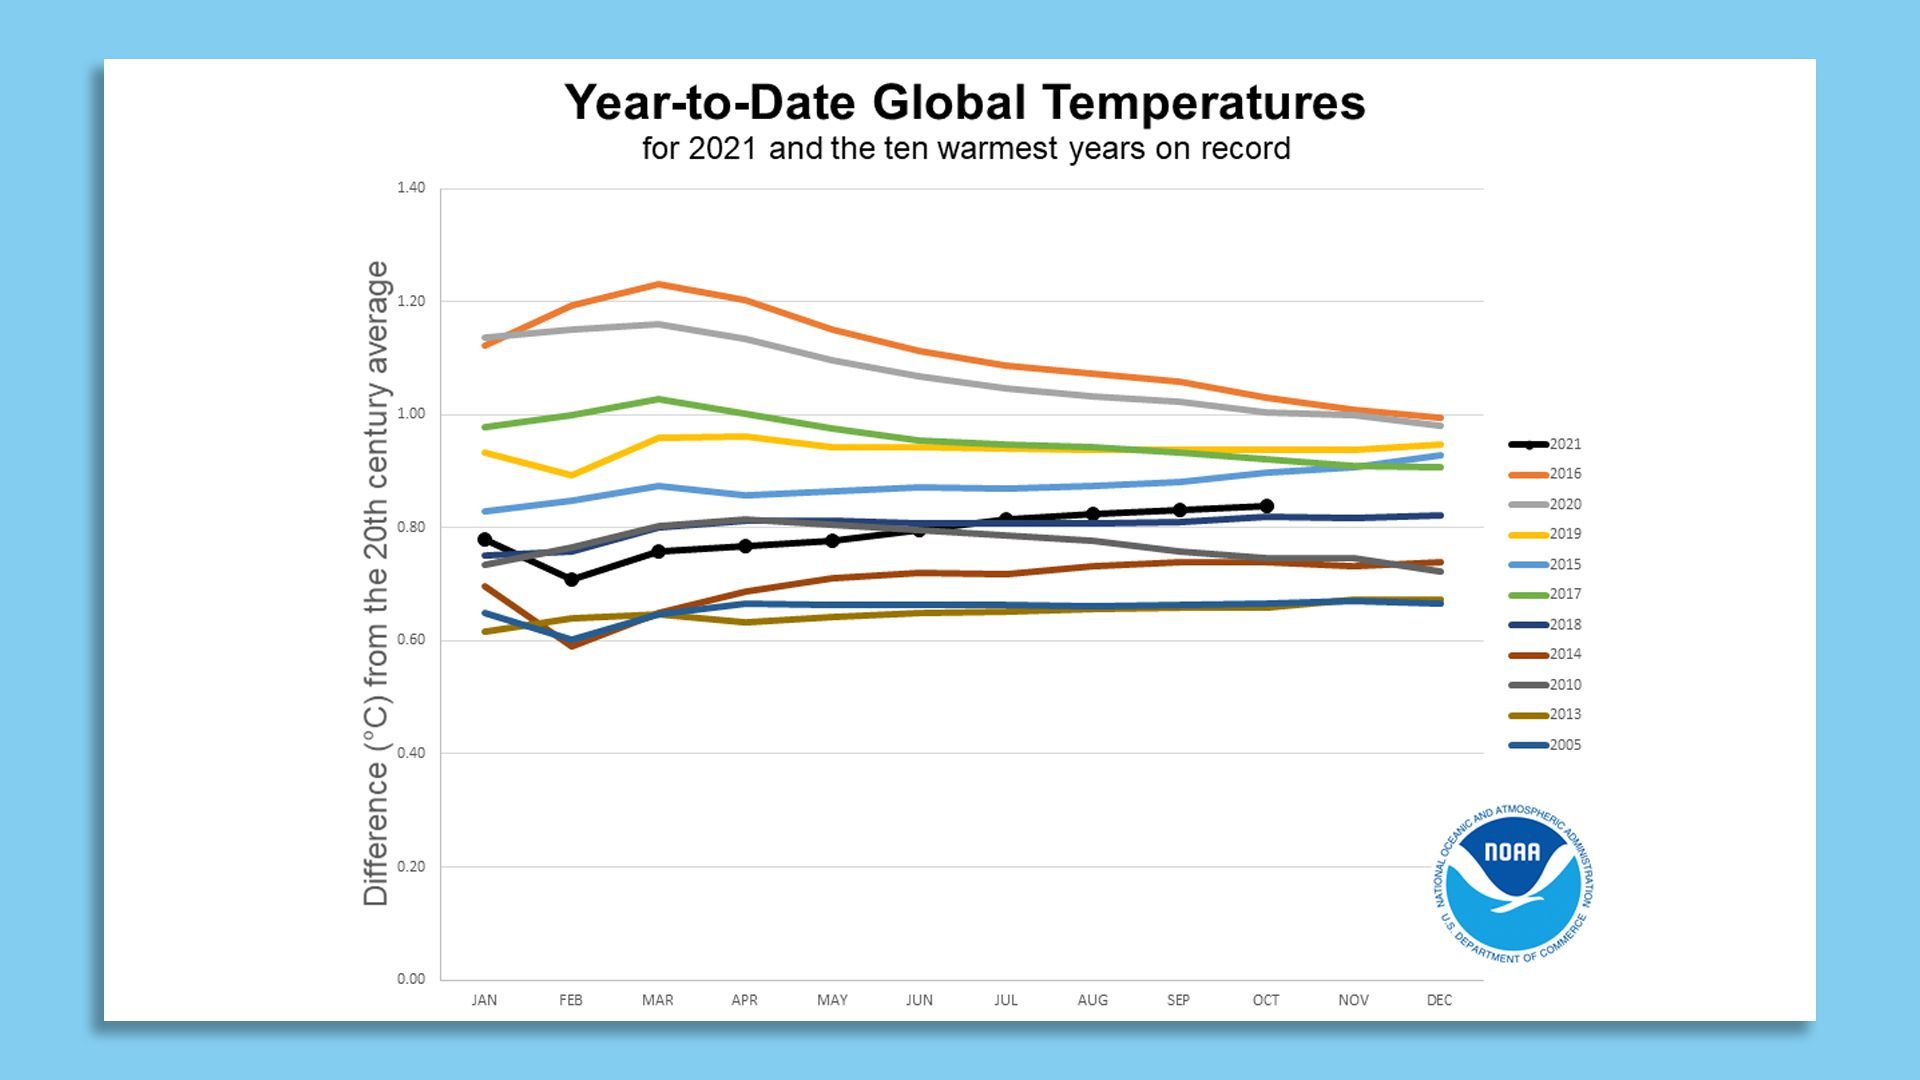 A chart showing year-to-date global temperatures